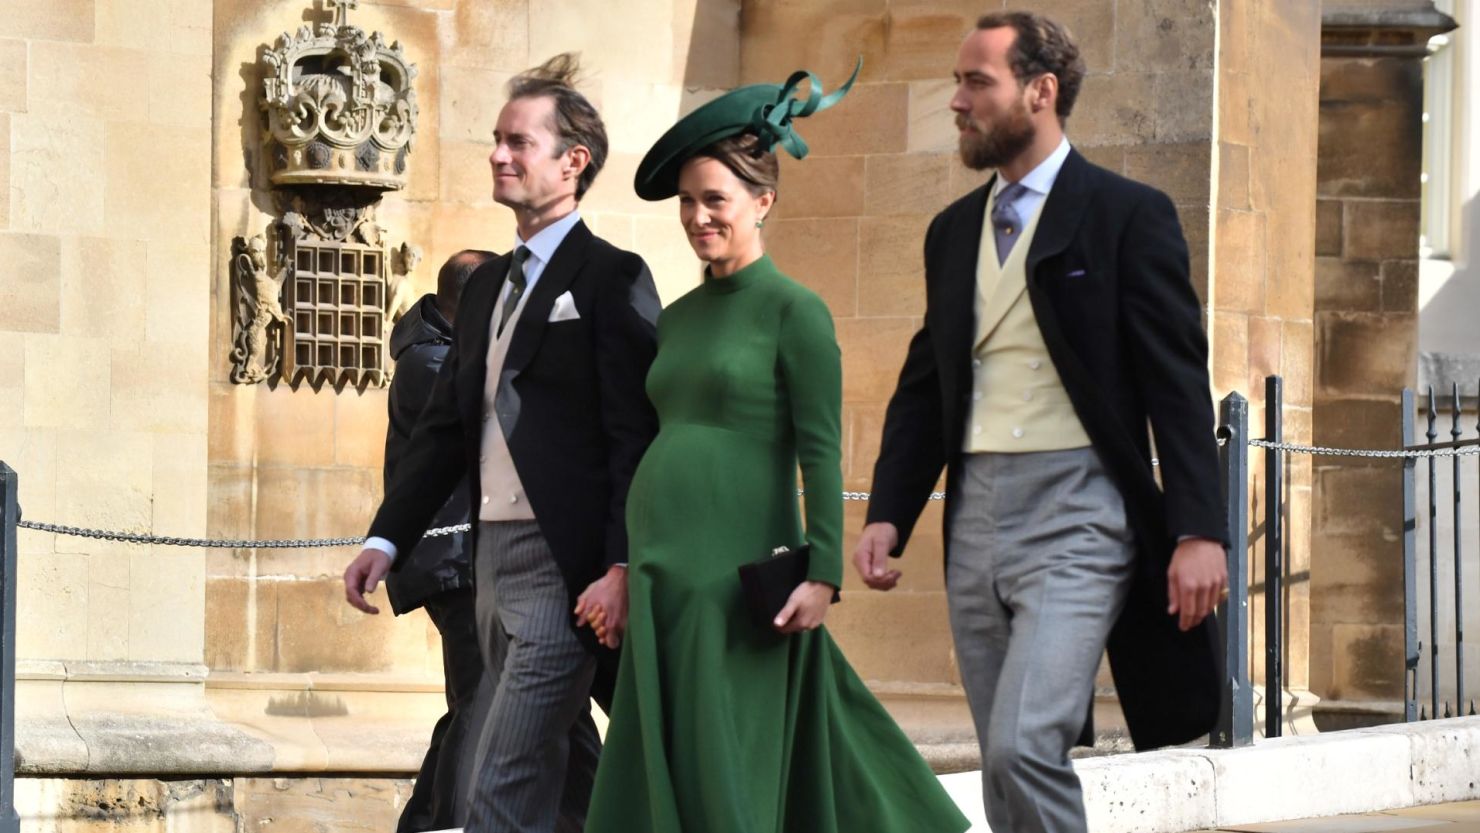 Pippa Middleton attends the wedding of Princess Eugenie of York to Jack Brooksbank alongside husband James Matthews, pictured left, and brother James Middleton, pictured right, on Friday. 